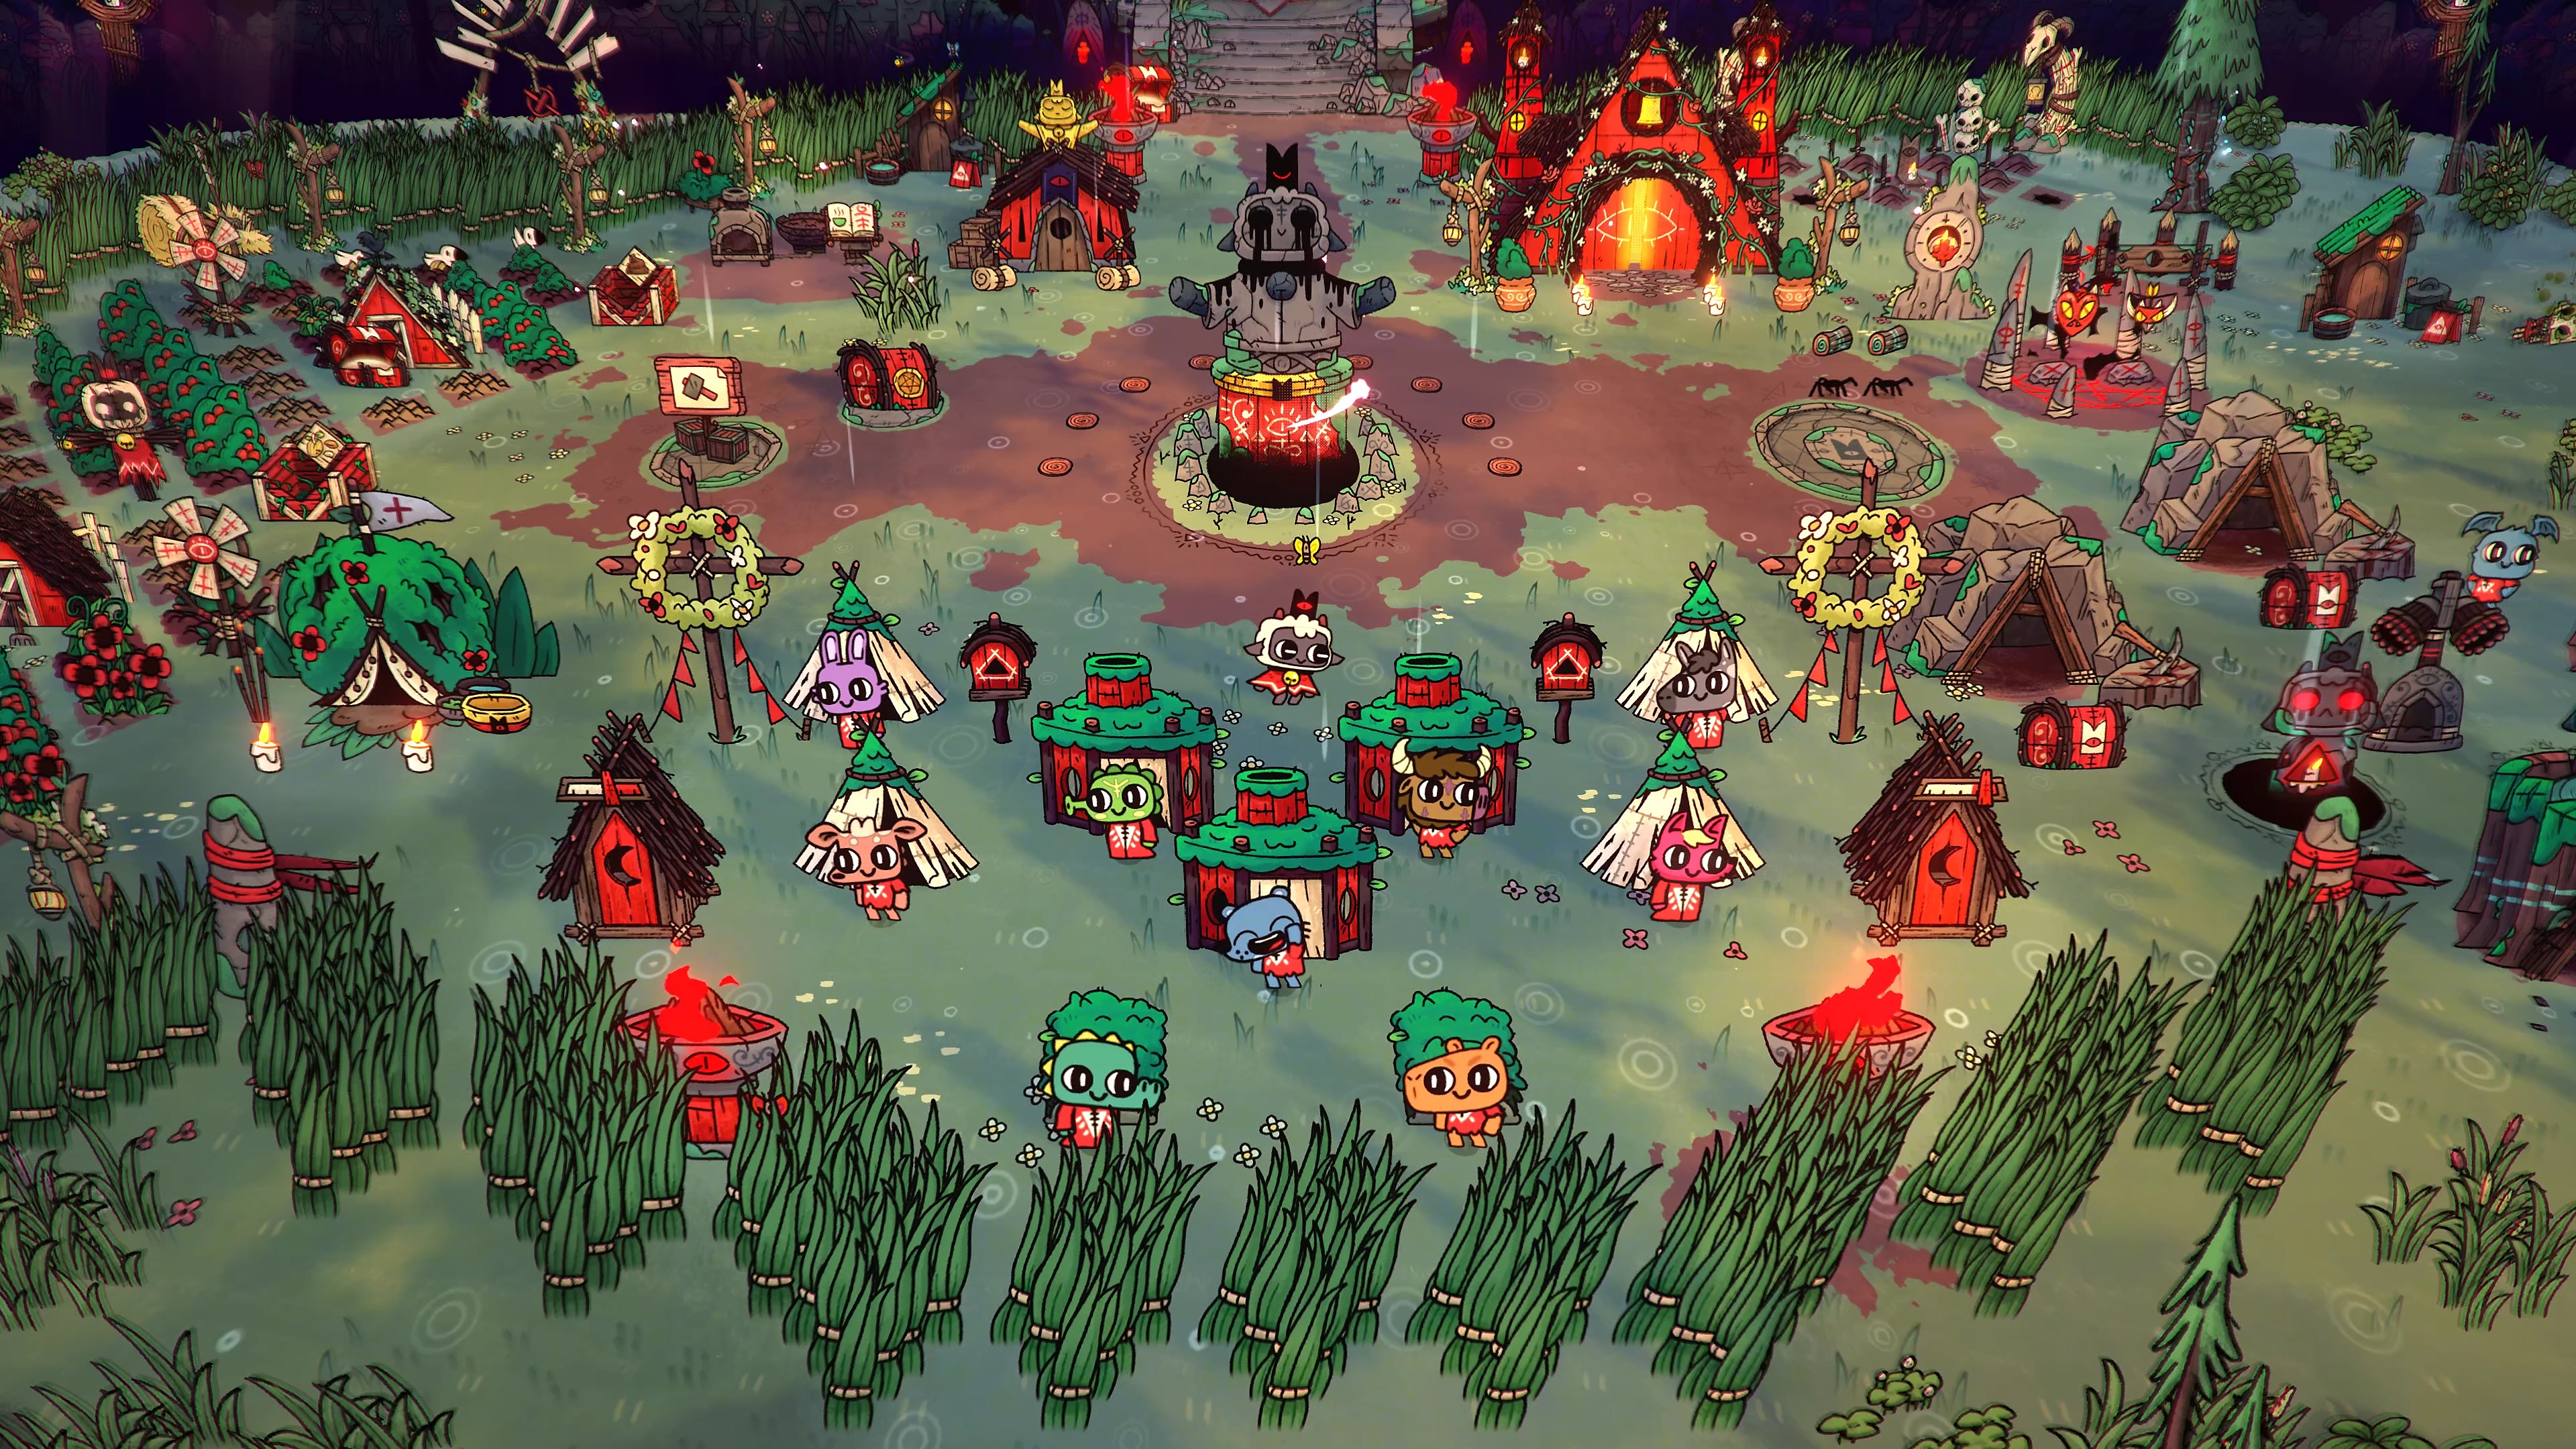 Cult of the Lamb screenshot showing many characters